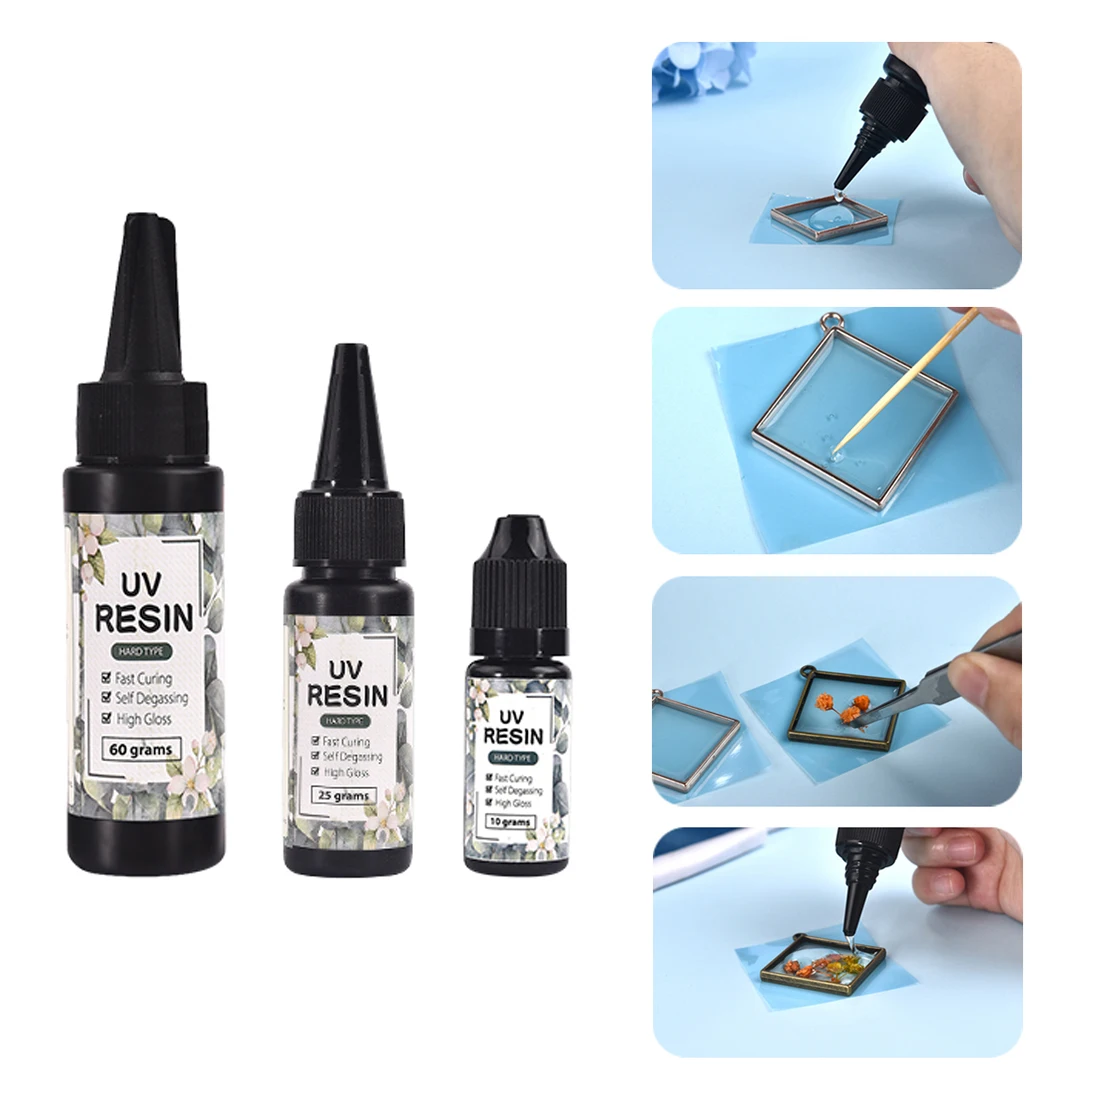 25g-1000g Hard UV Resin Glue Quick Drying Crystal Clear Ultraviolet Curing  Epoxy Resin UV Glue Sunlight Activated DIY Jewelry - AliExpress